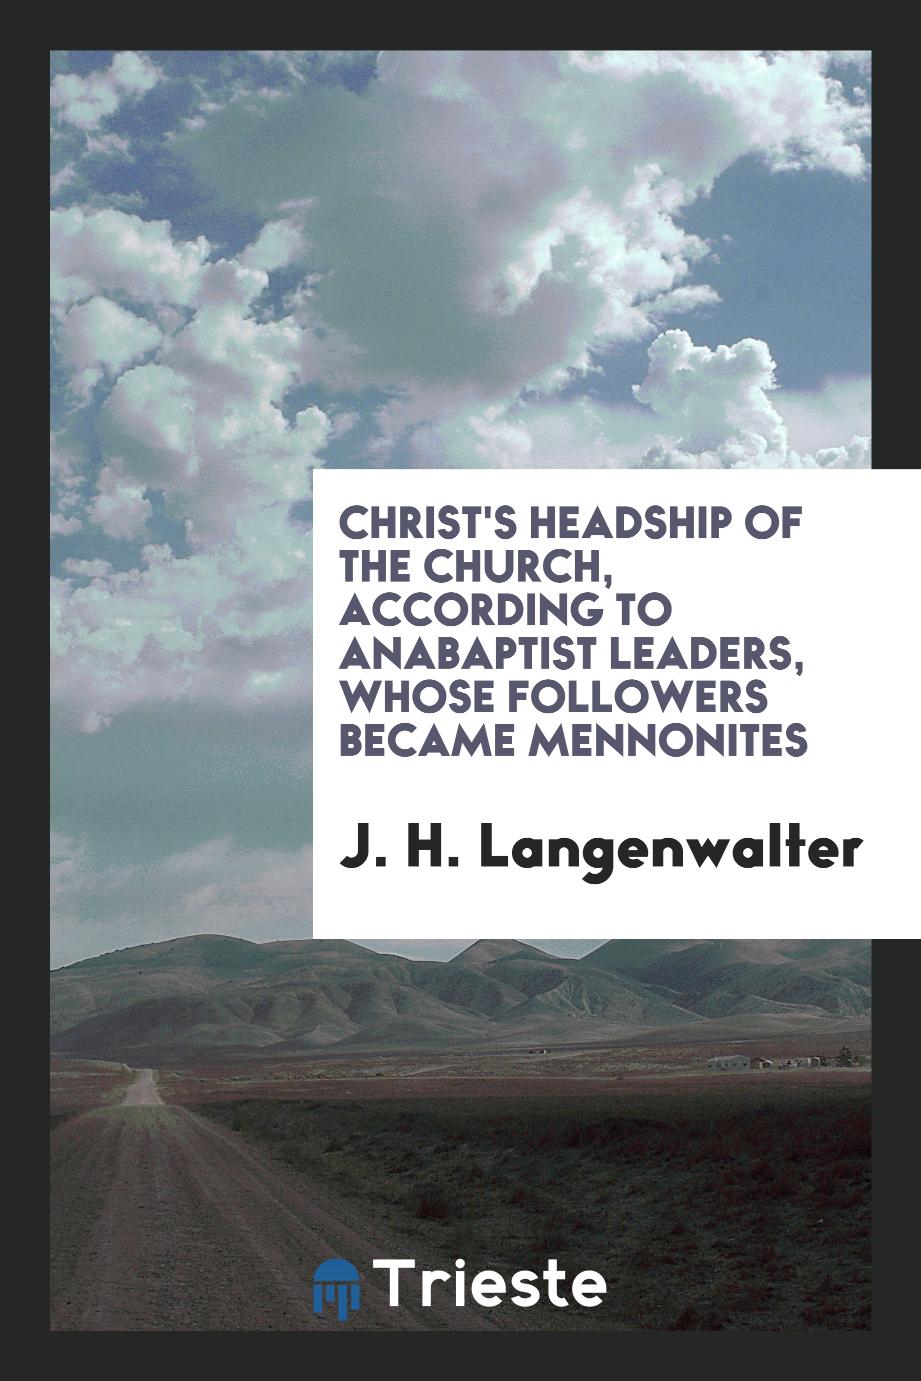 Christ's headship of the church, according to Anabaptist leaders, whose followers became Mennonites